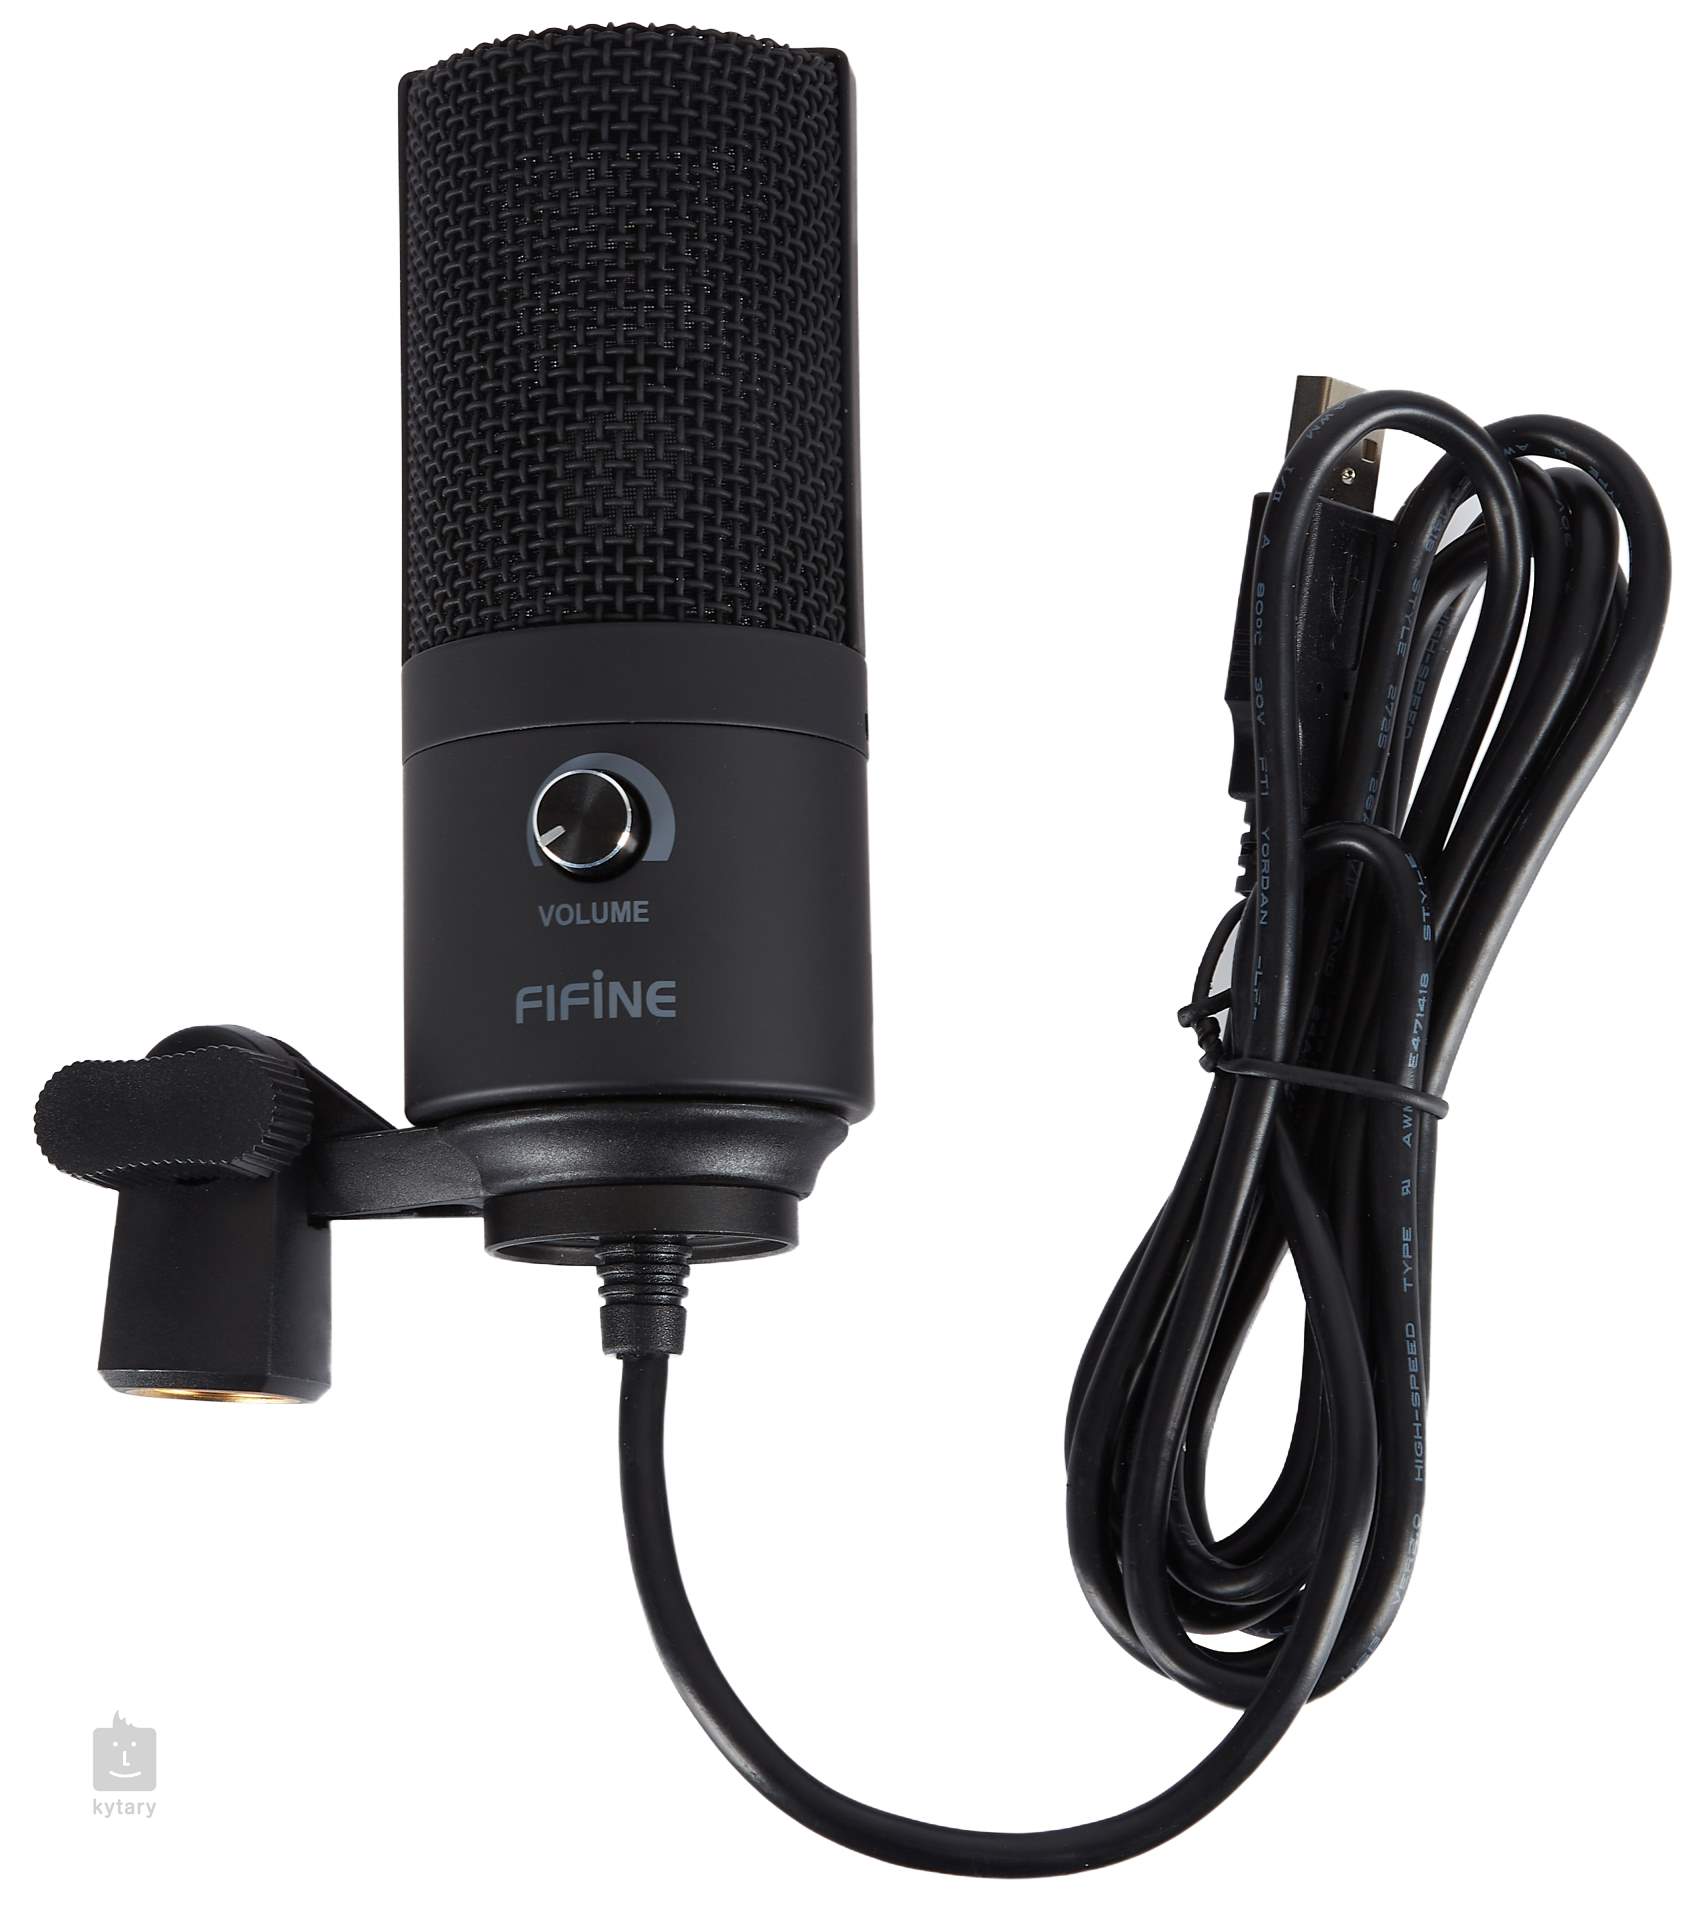 FIFINE K669B Cardioid USB Studio Recording Microphone Tested Working